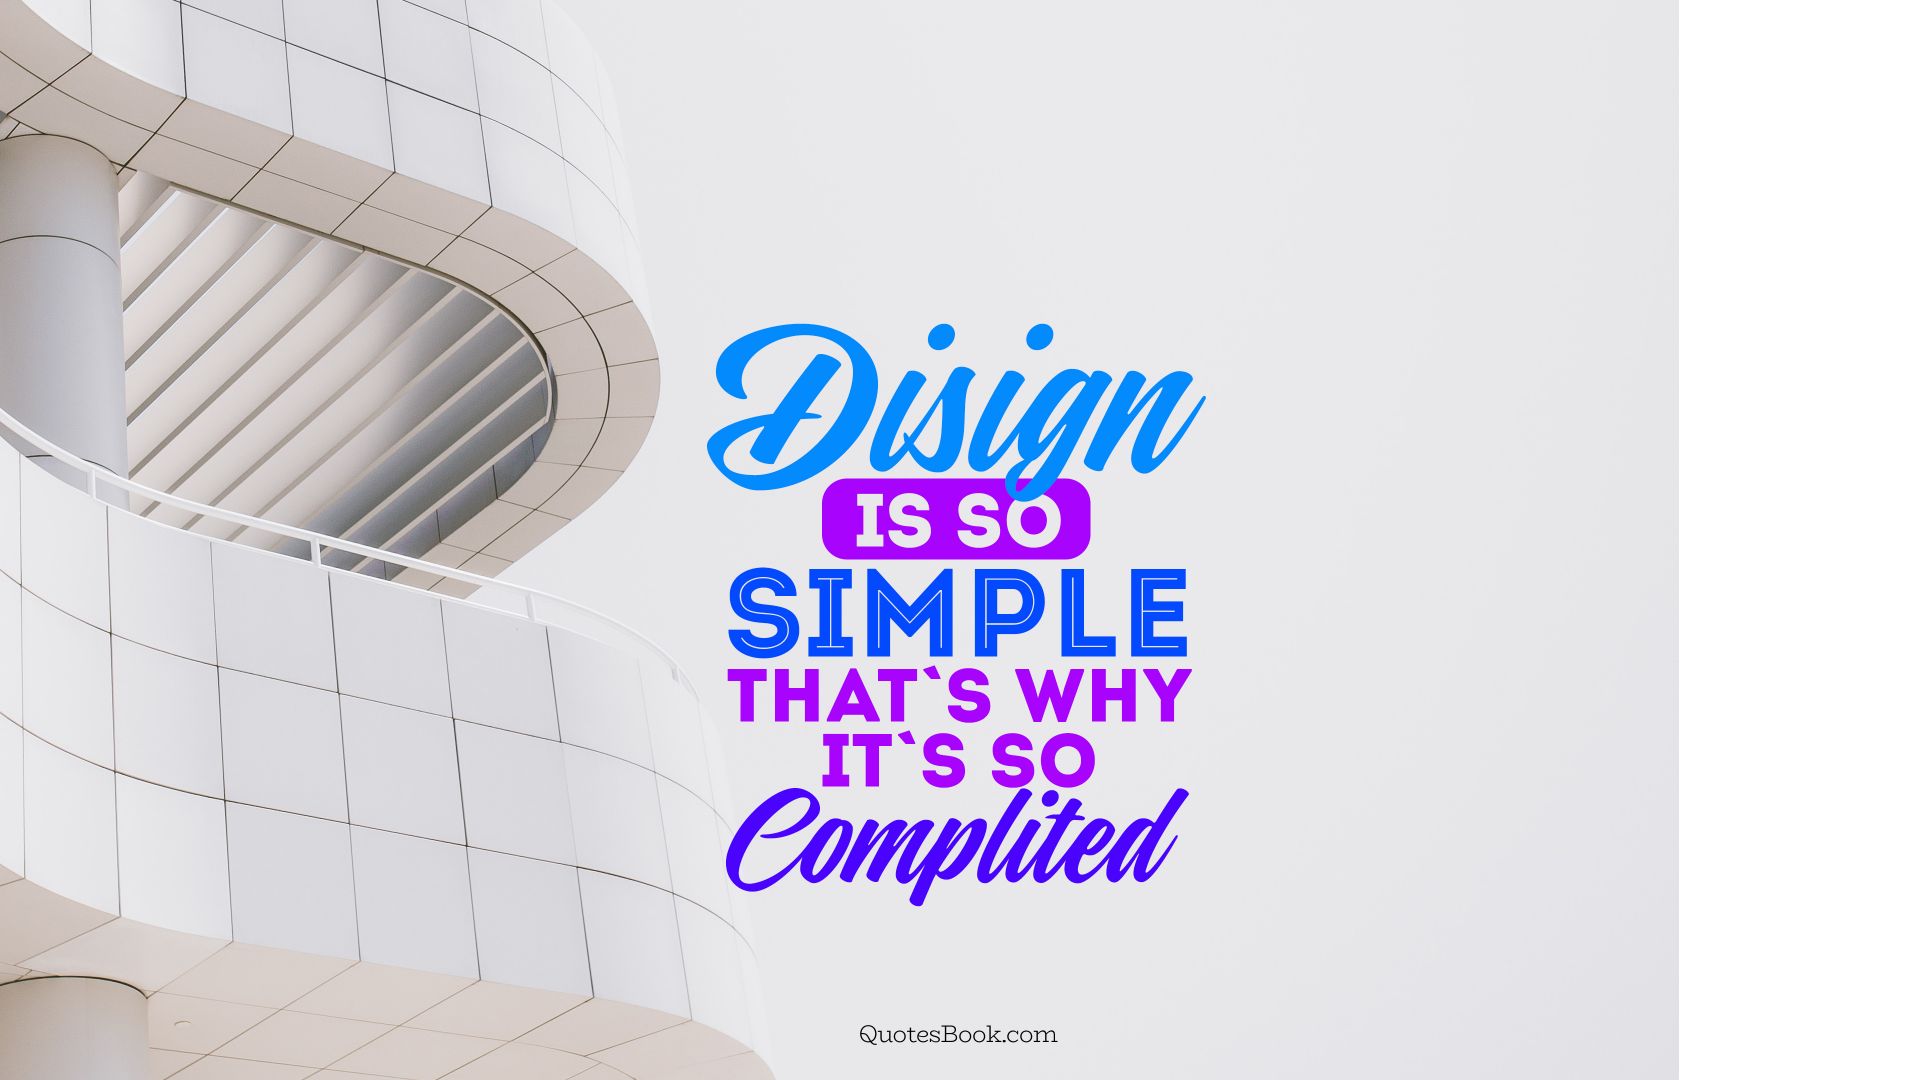 Disign is so simple thats's why it's so complited